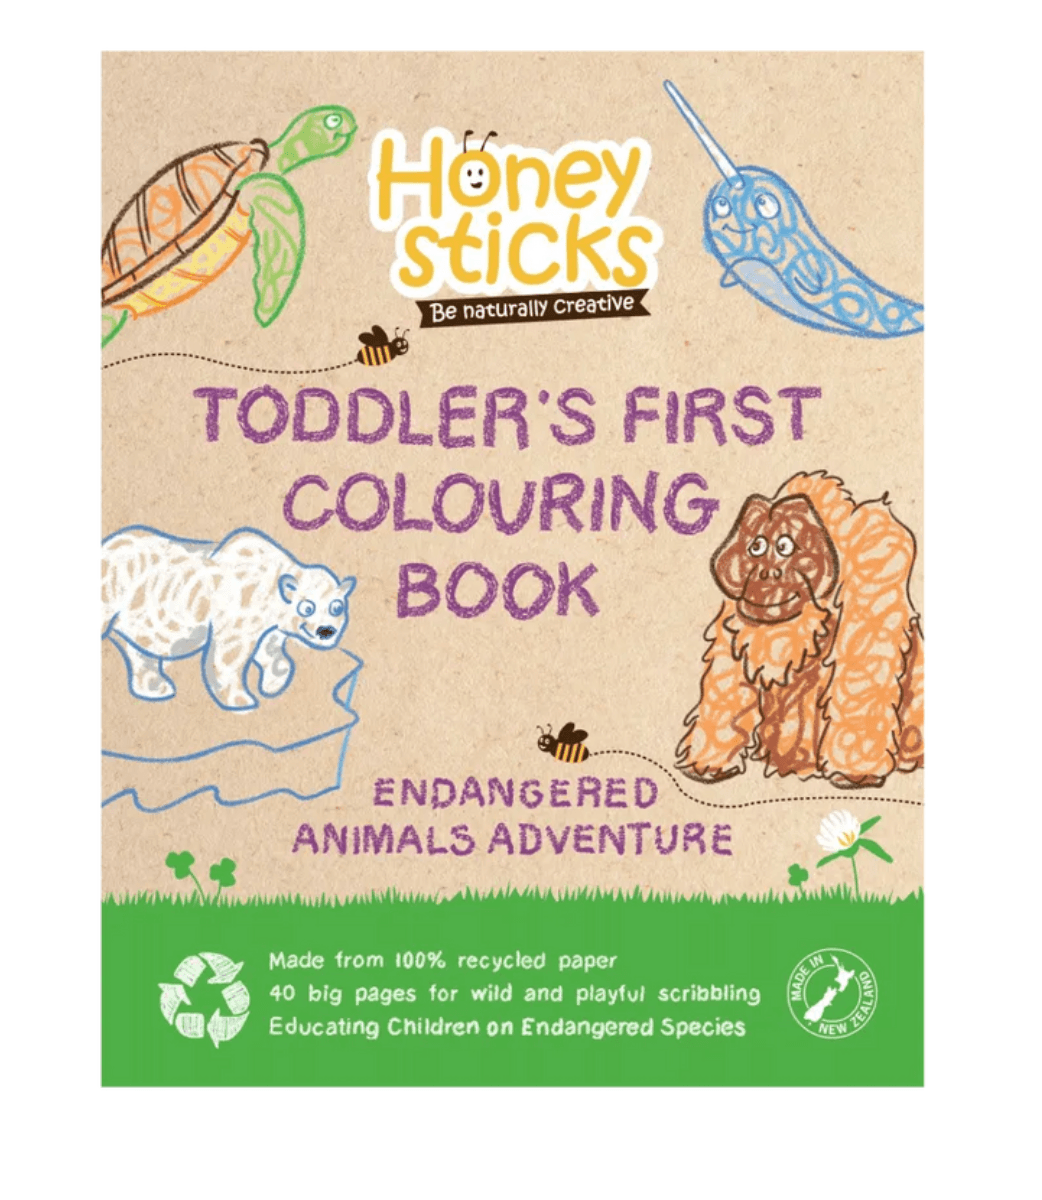 Toddlers First Colouring Book - An Endangered Animals Adventure - Taylorson